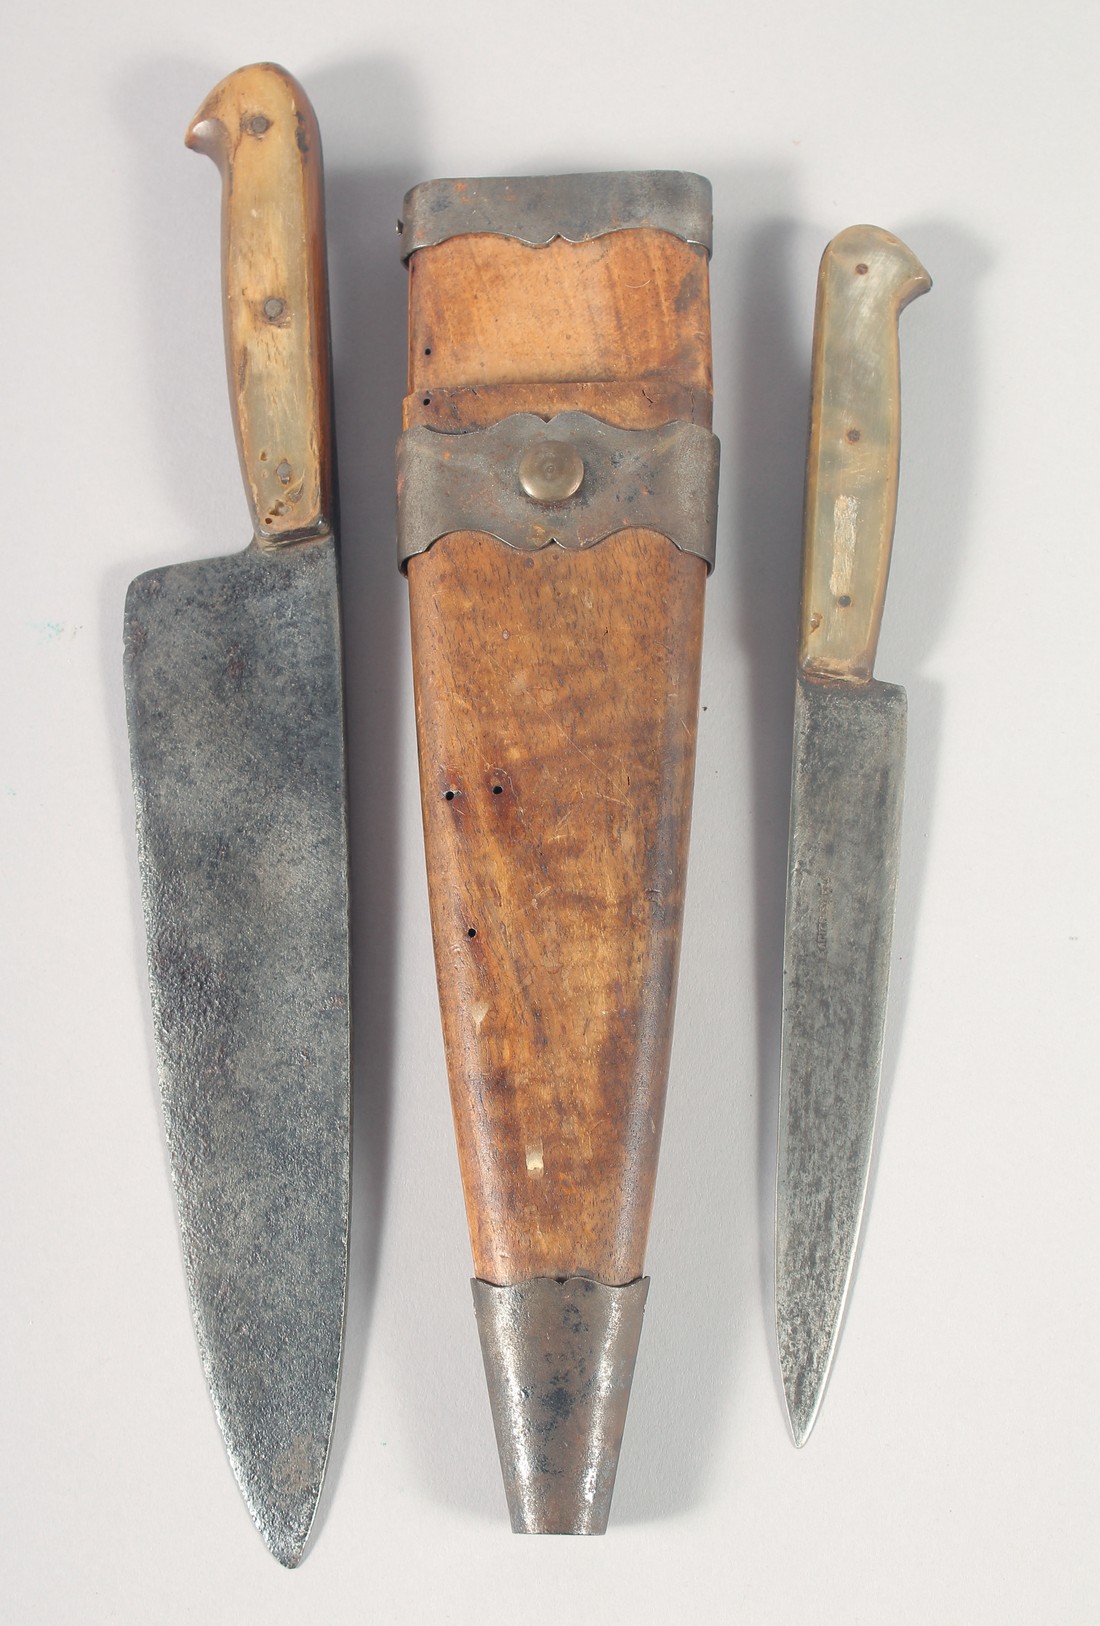 AN EARLY BORDET KNIFE 13" LONG AND A ACIER FONJU KNIFE 11" LONG, both with horn handles, in a